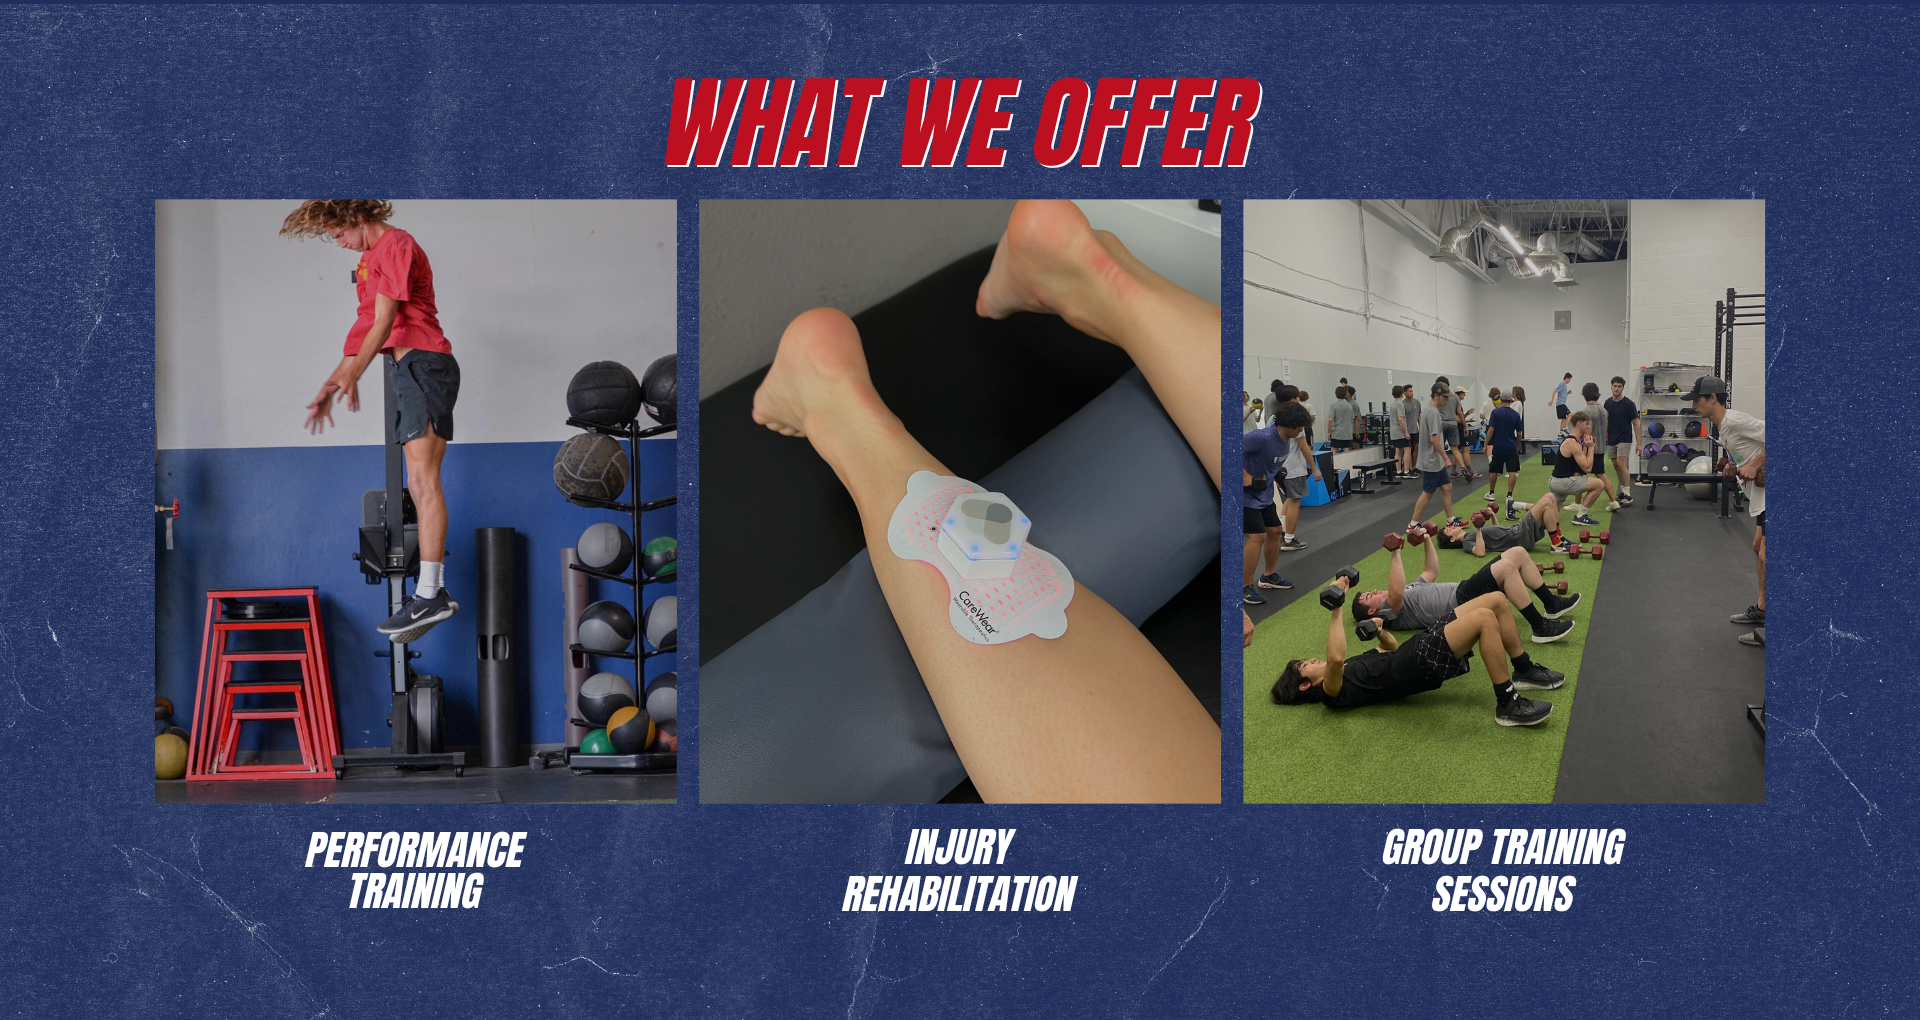 Compete-Sports-Performance-Rehab-Orange-County-2-What-we-offer